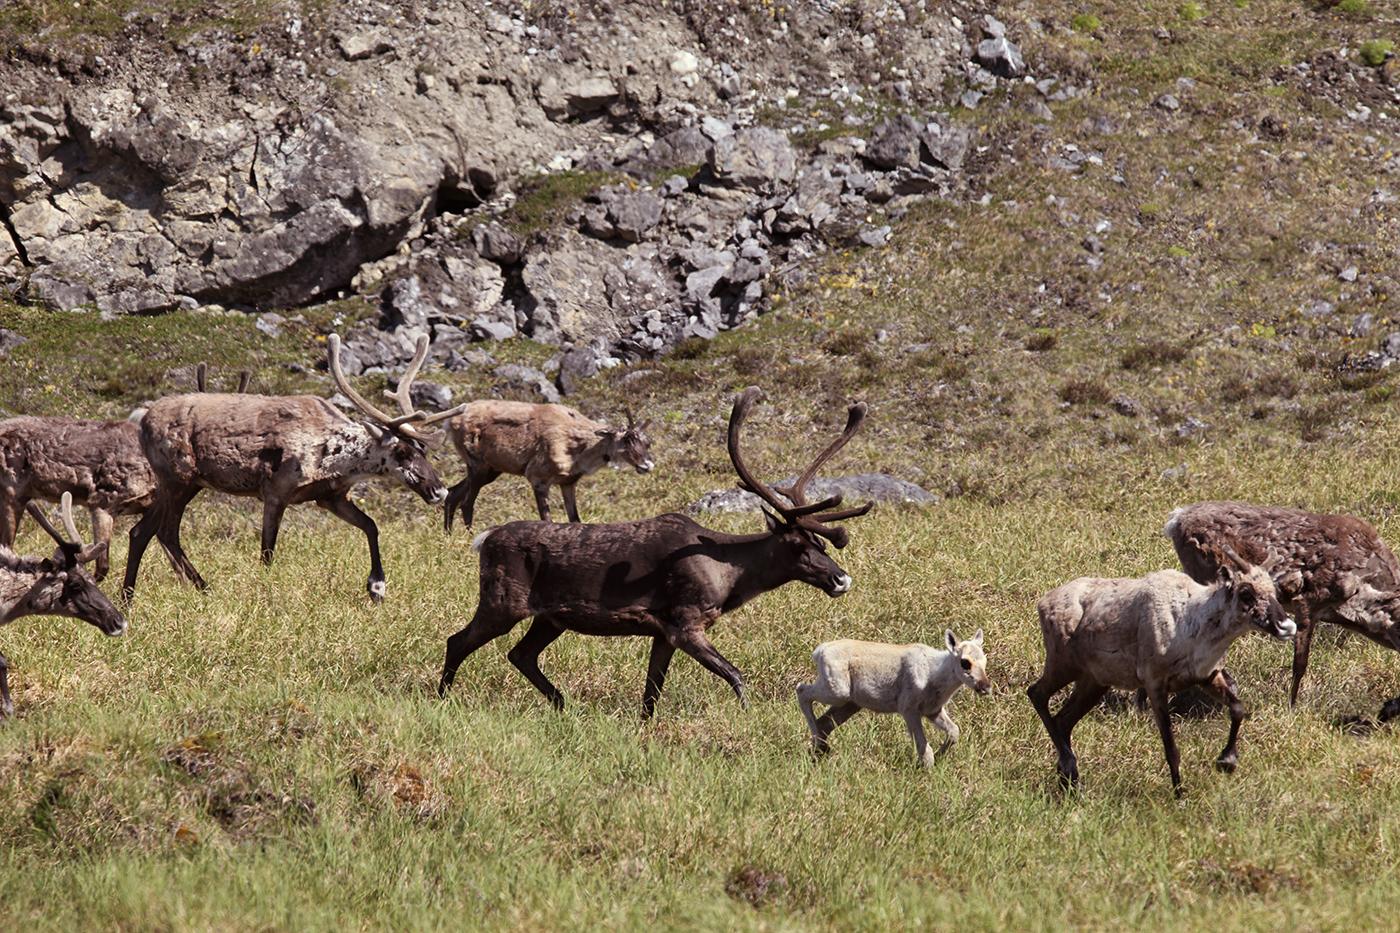 Porcupine Caribou Herd bulls come together with cows and their calves during the annual aggregation event in the Arctic National Wildlife Refuge, Alaska. Photo: Max Hug Williams